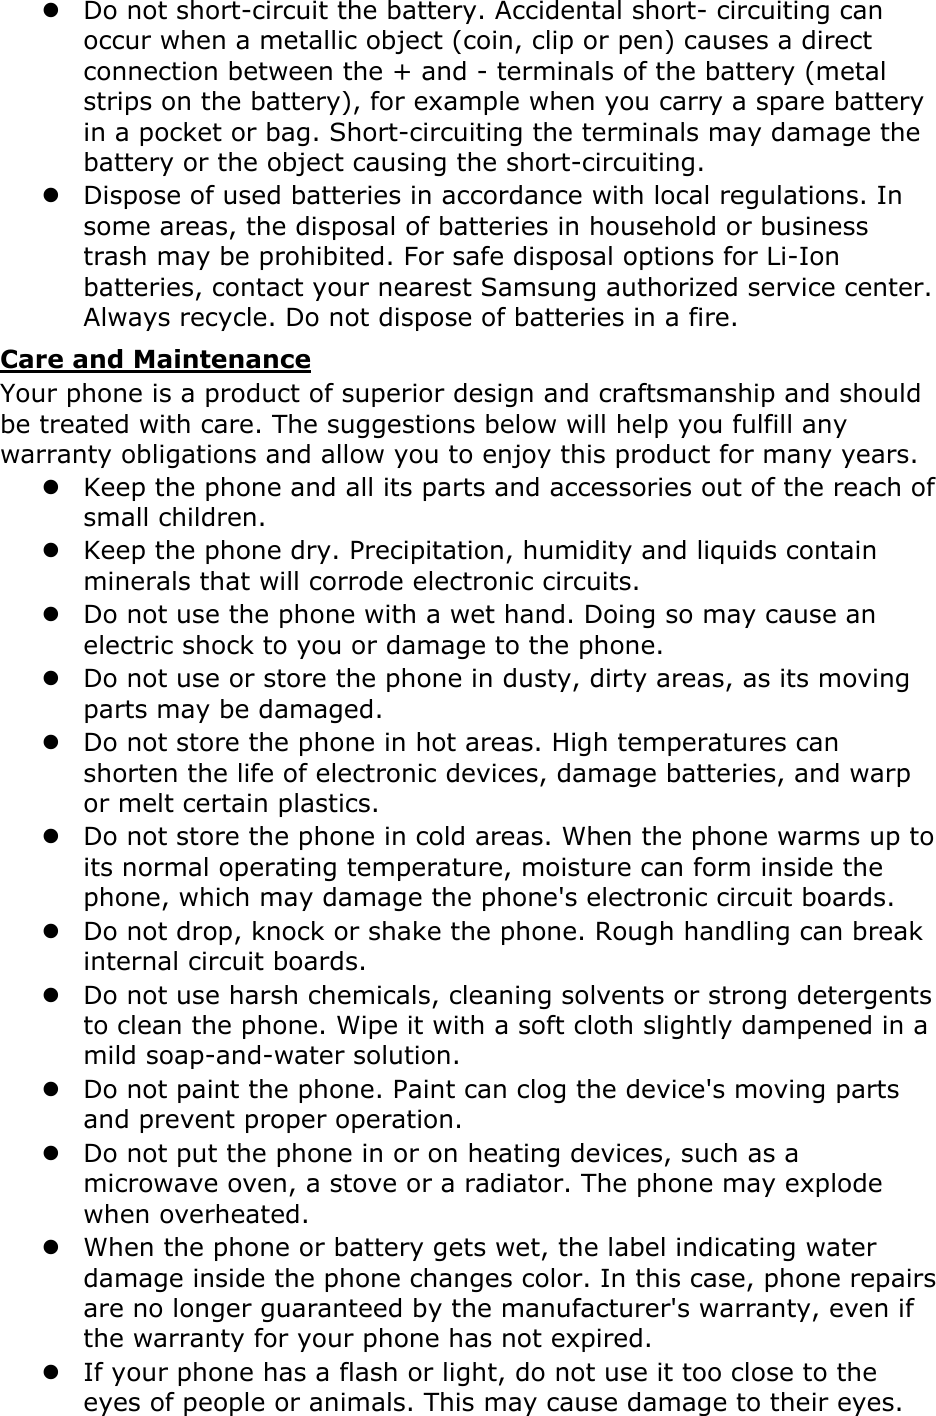 Page 20 of Samsung Electronics Co GTC3262 Portable Handset User Manual 